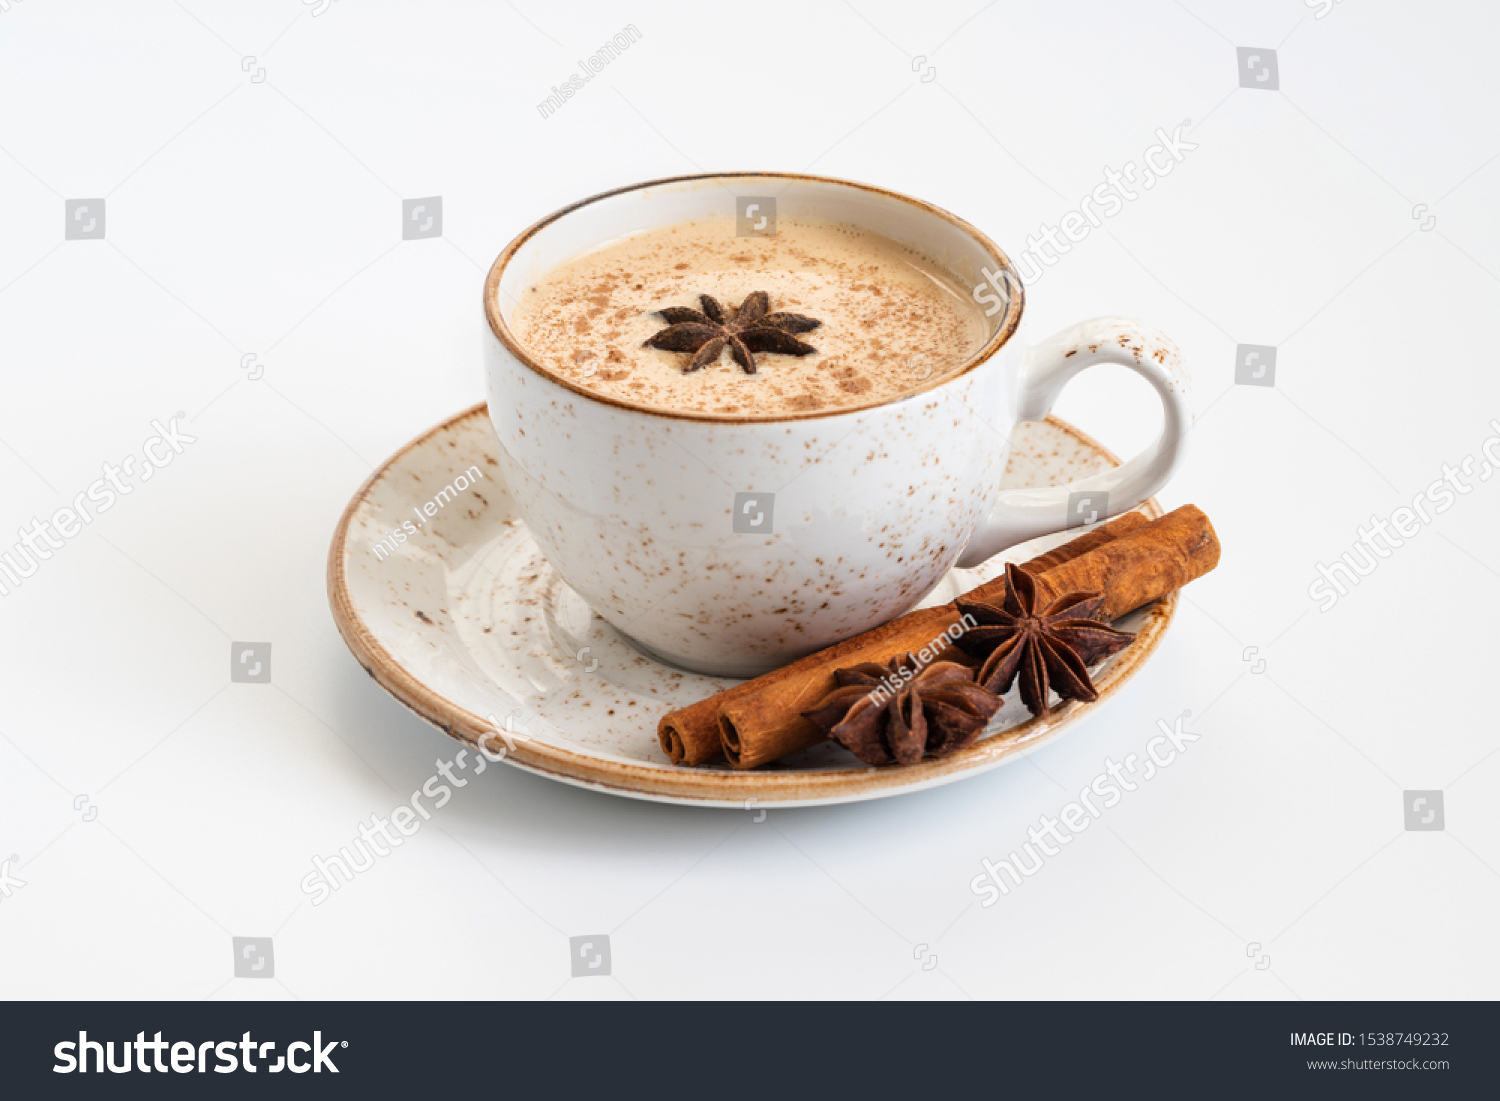 Indian Masala chai tea. Traditional Indian hot drink with milk and spices on white background close up. #1538749232